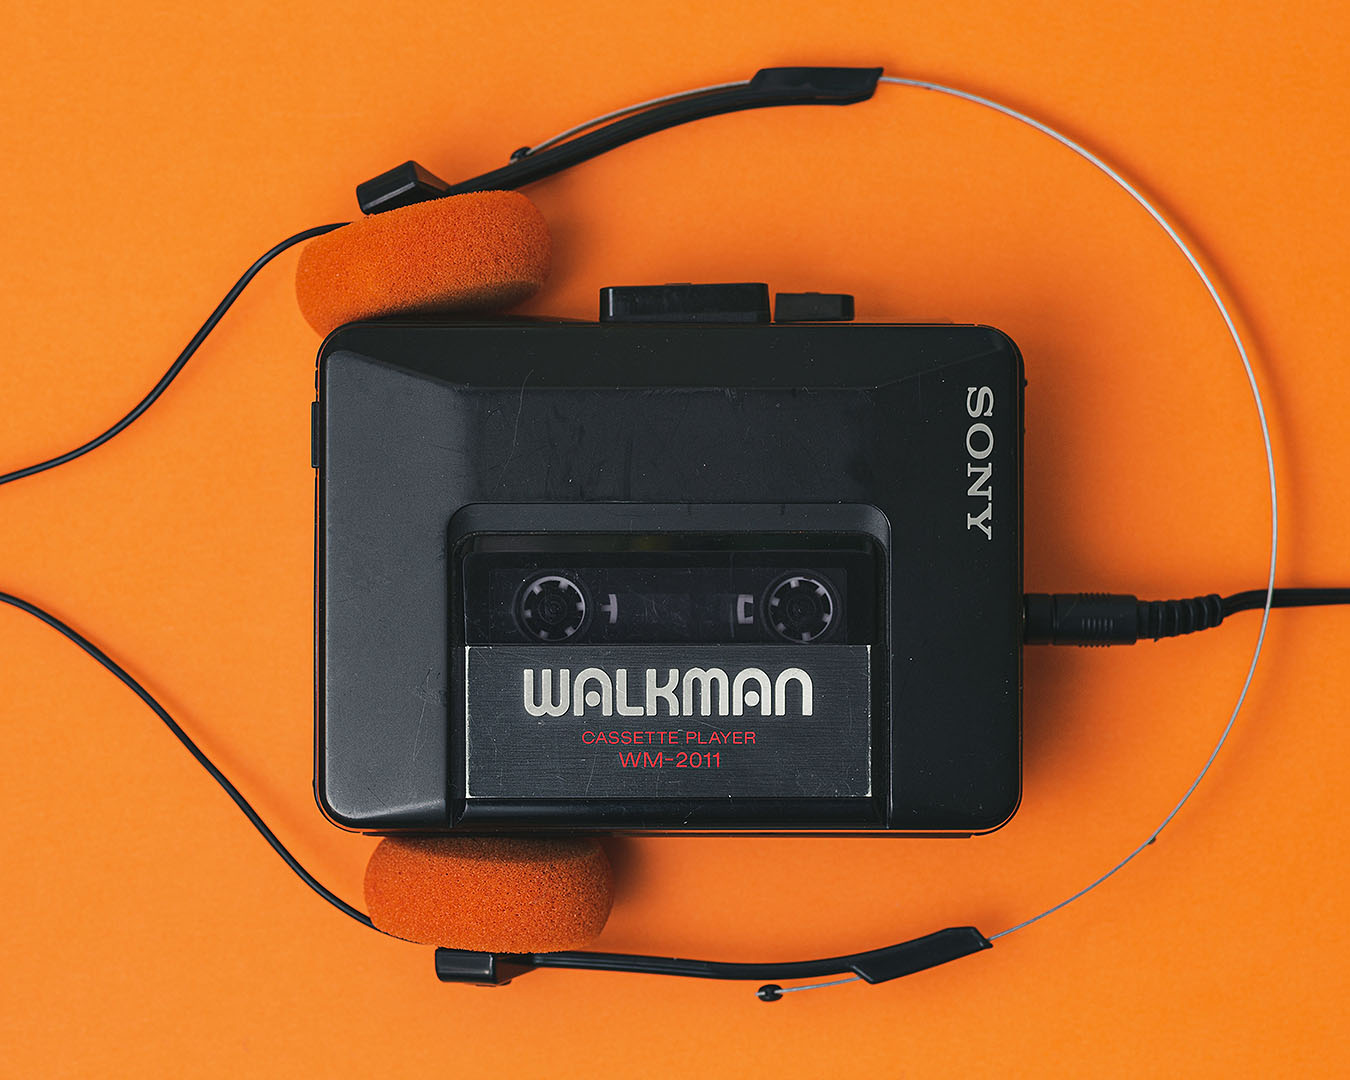 Old school cassette player with black and orange headphones on a bright orange background.